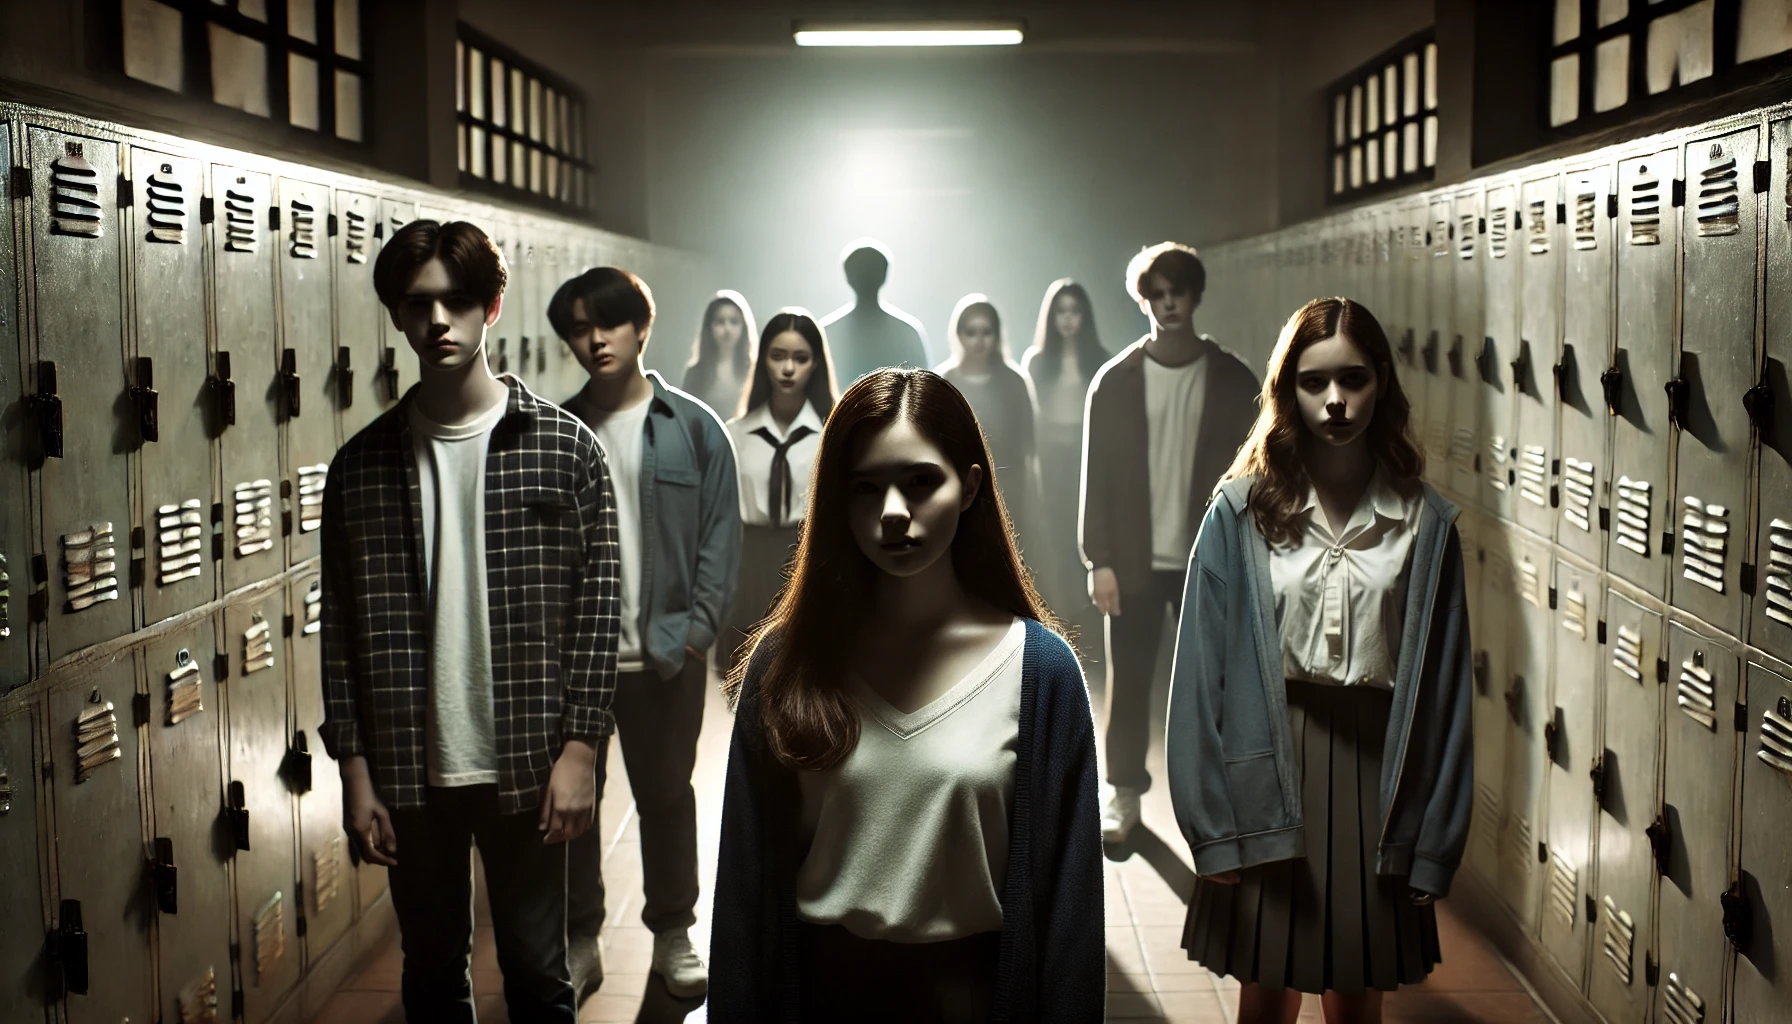 The Anticipation of “School Spirits” Season 2: What to Expect